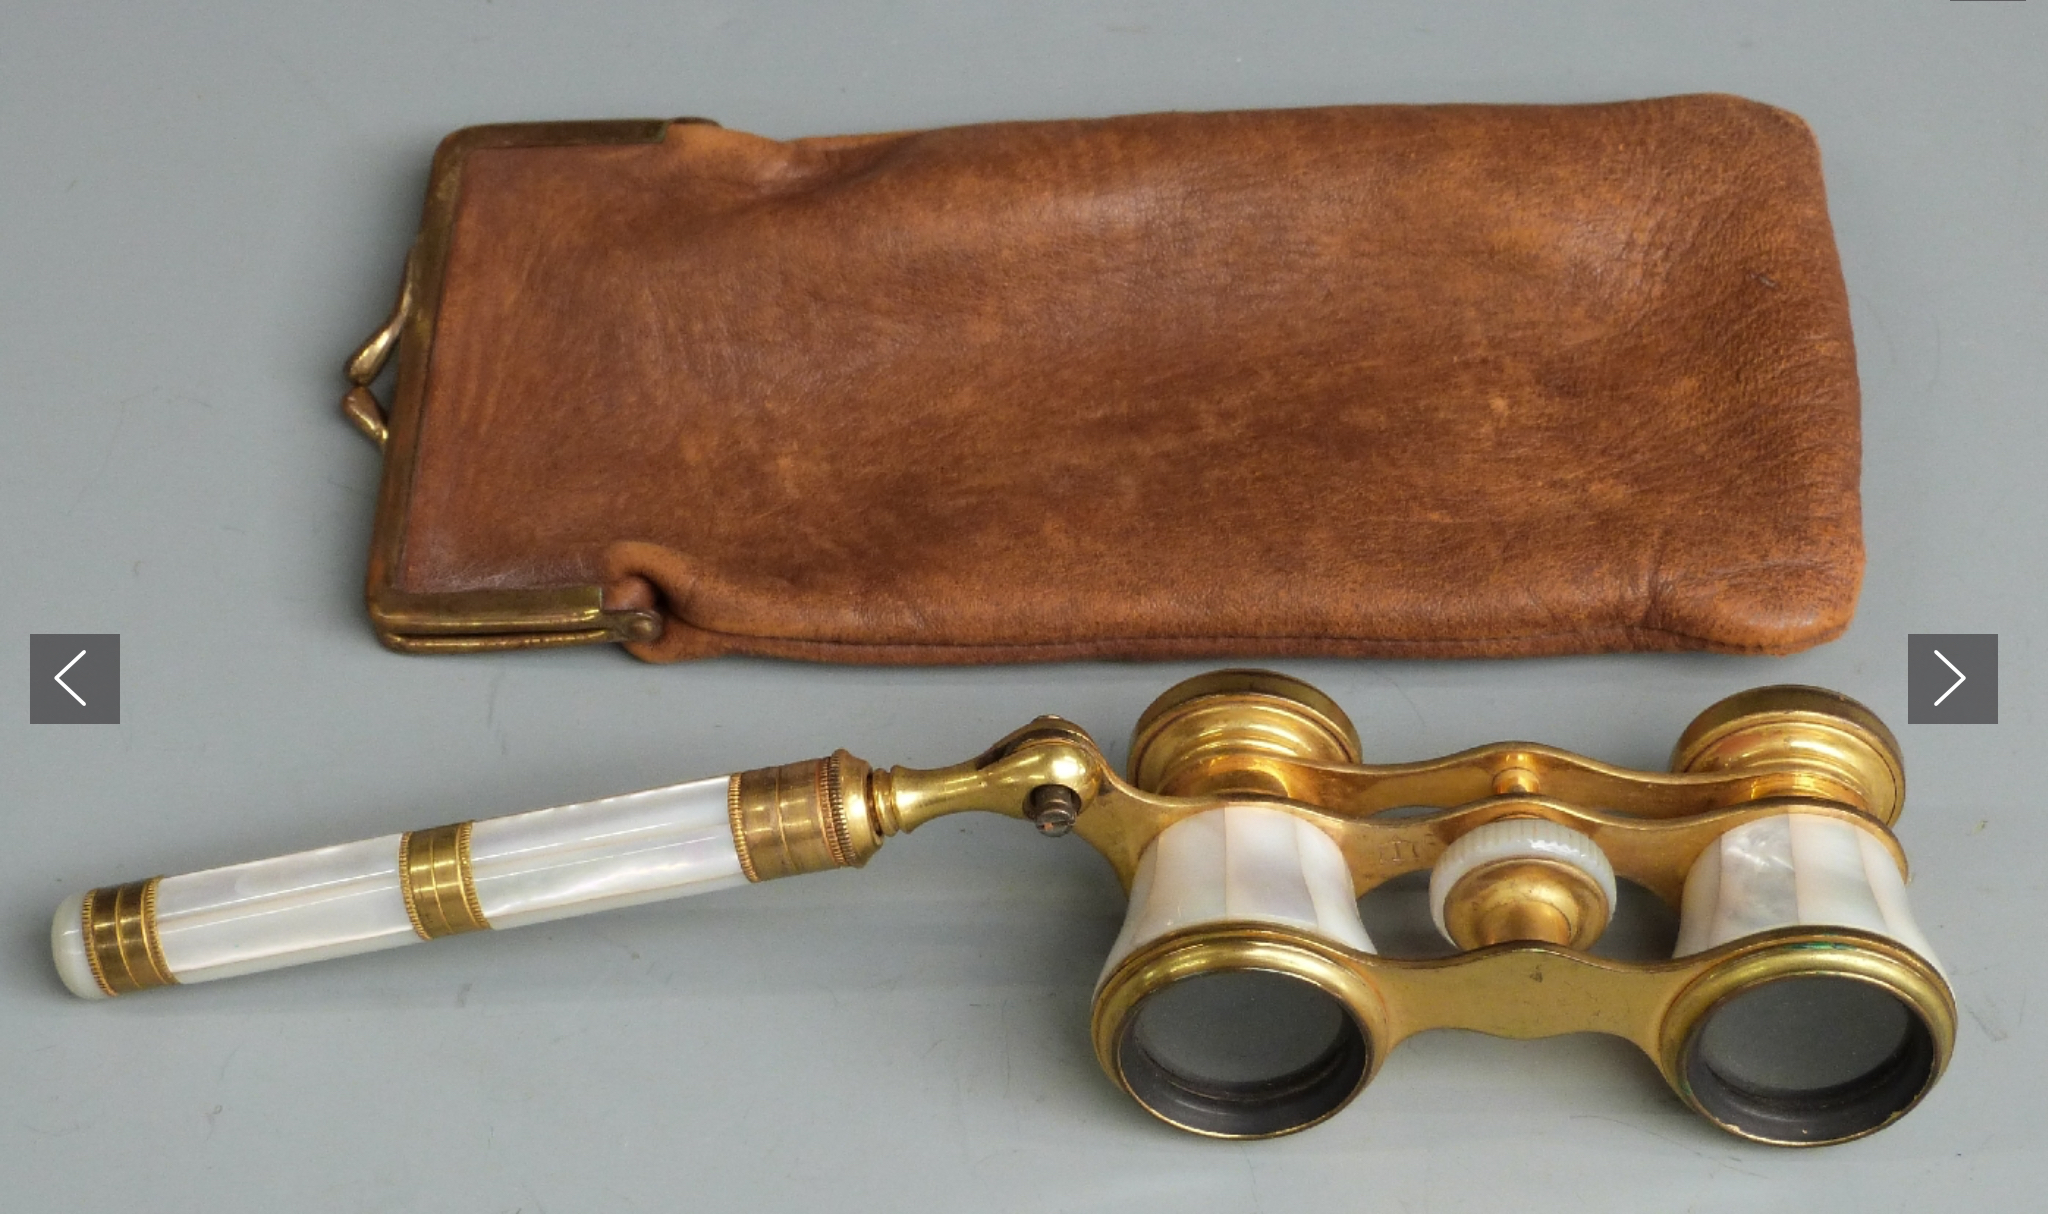 Pair of mother of Pearl opera glasses in kid-glove case